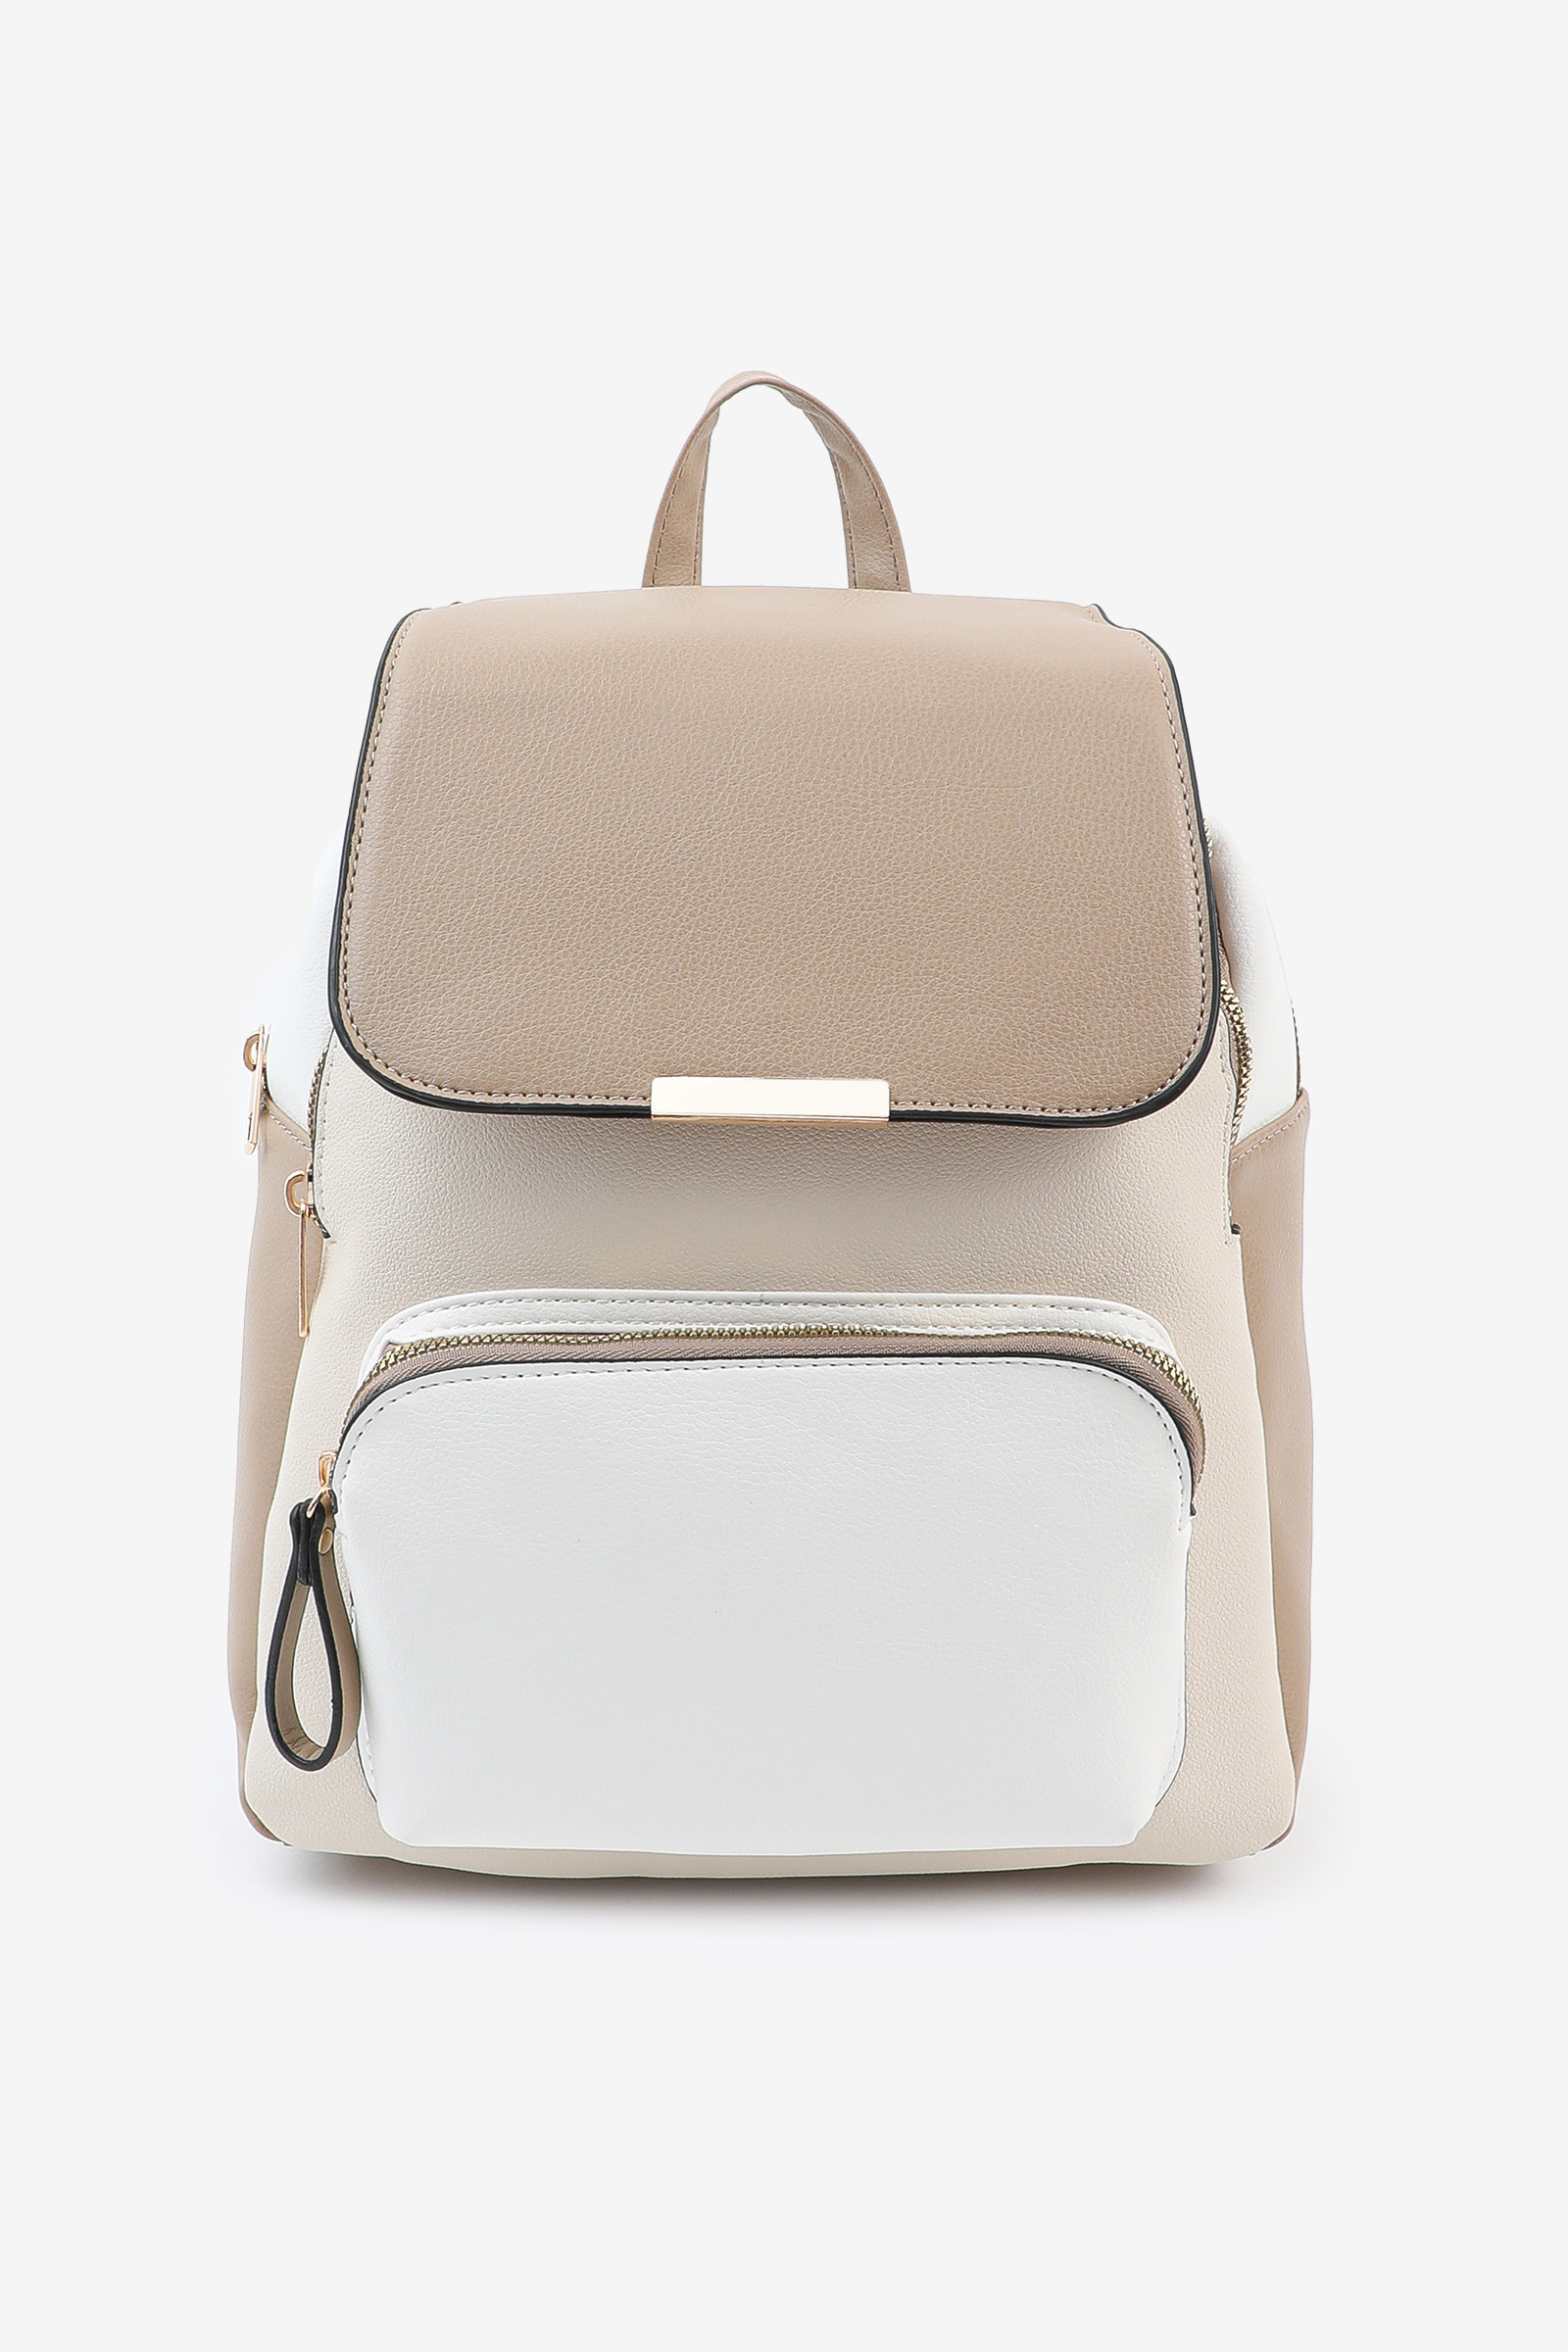 Ardene Flap backpack in Beige | Faux Leather/Polyester